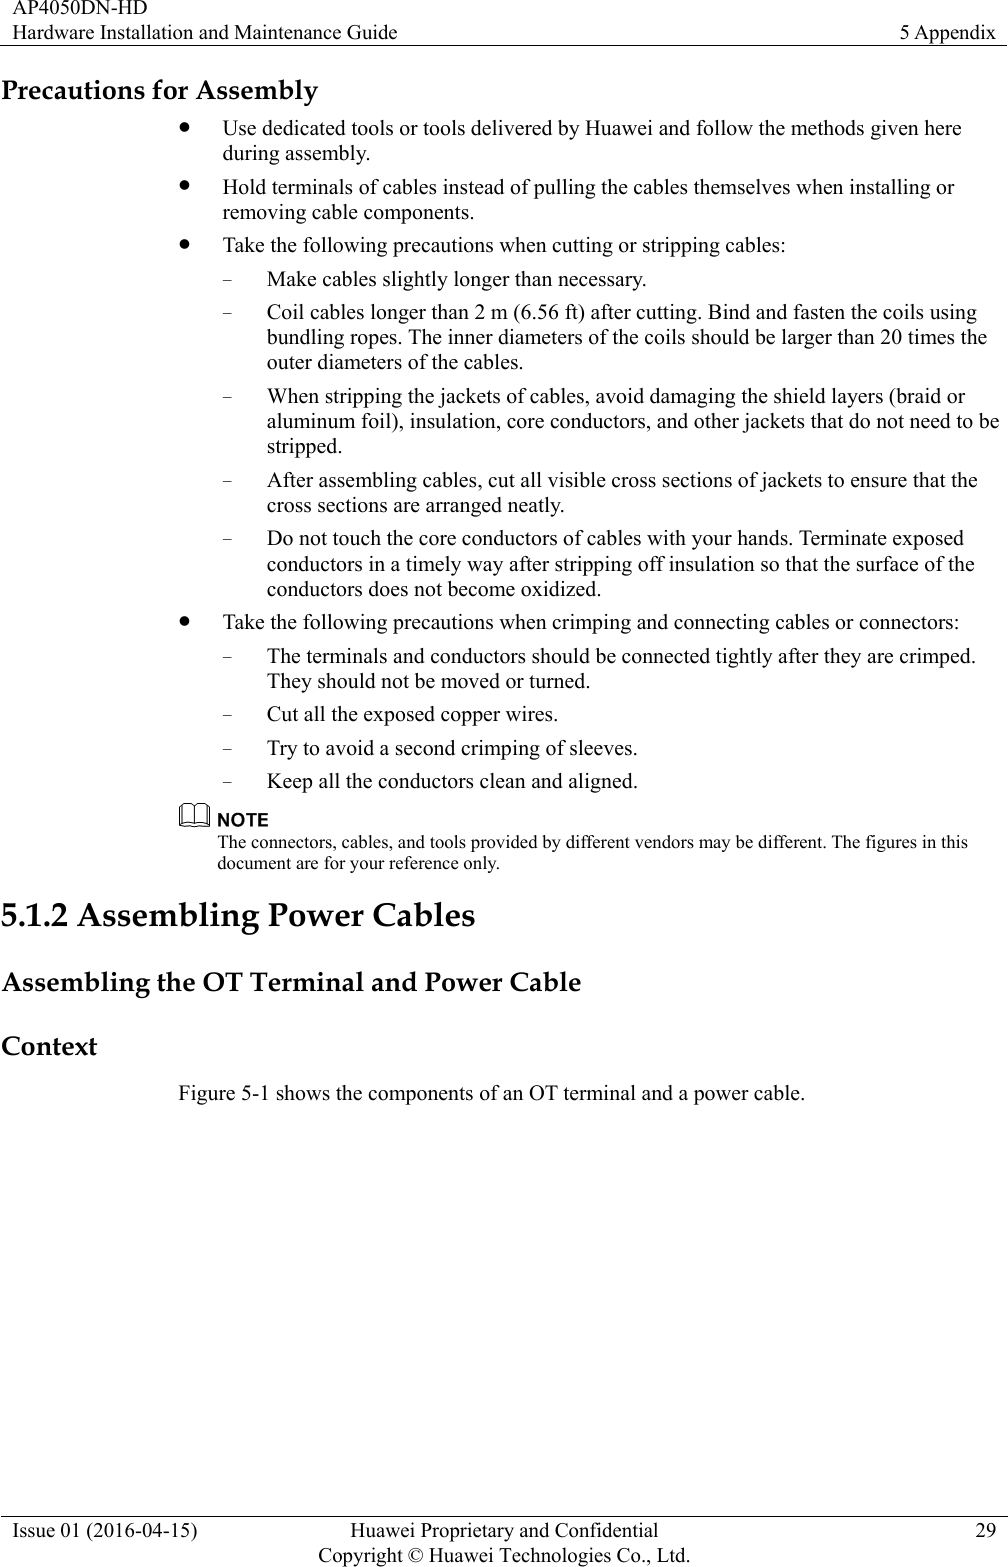 AP4050DN-HD Hardware Installation and Maintenance Guide  5 Appendix Issue 01 (2016-04-15)  Huawei Proprietary and Confidential         Copyright © Huawei Technologies Co., Ltd.29 Precautions for Assembly  Use dedicated tools or tools delivered by Huawei and follow the methods given here during assembly.  Hold terminals of cables instead of pulling the cables themselves when installing or removing cable components.  Take the following precautions when cutting or stripping cables: − Make cables slightly longer than necessary. − Coil cables longer than 2 m (6.56 ft) after cutting. Bind and fasten the coils using bundling ropes. The inner diameters of the coils should be larger than 20 times the outer diameters of the cables. − When stripping the jackets of cables, avoid damaging the shield layers (braid or aluminum foil), insulation, core conductors, and other jackets that do not need to be stripped. − After assembling cables, cut all visible cross sections of jackets to ensure that the cross sections are arranged neatly. − Do not touch the core conductors of cables with your hands. Terminate exposed conductors in a timely way after stripping off insulation so that the surface of the conductors does not become oxidized.  Take the following precautions when crimping and connecting cables or connectors: − The terminals and conductors should be connected tightly after they are crimped. They should not be moved or turned. − Cut all the exposed copper wires. − Try to avoid a second crimping of sleeves. − Keep all the conductors clean and aligned.  The connectors, cables, and tools provided by different vendors may be different. The figures in this document are for your reference only. 5.1.2 Assembling Power Cables Assembling the OT Terminal and Power Cable Context Figure 5-1 shows the components of an OT terminal and a power cable. 